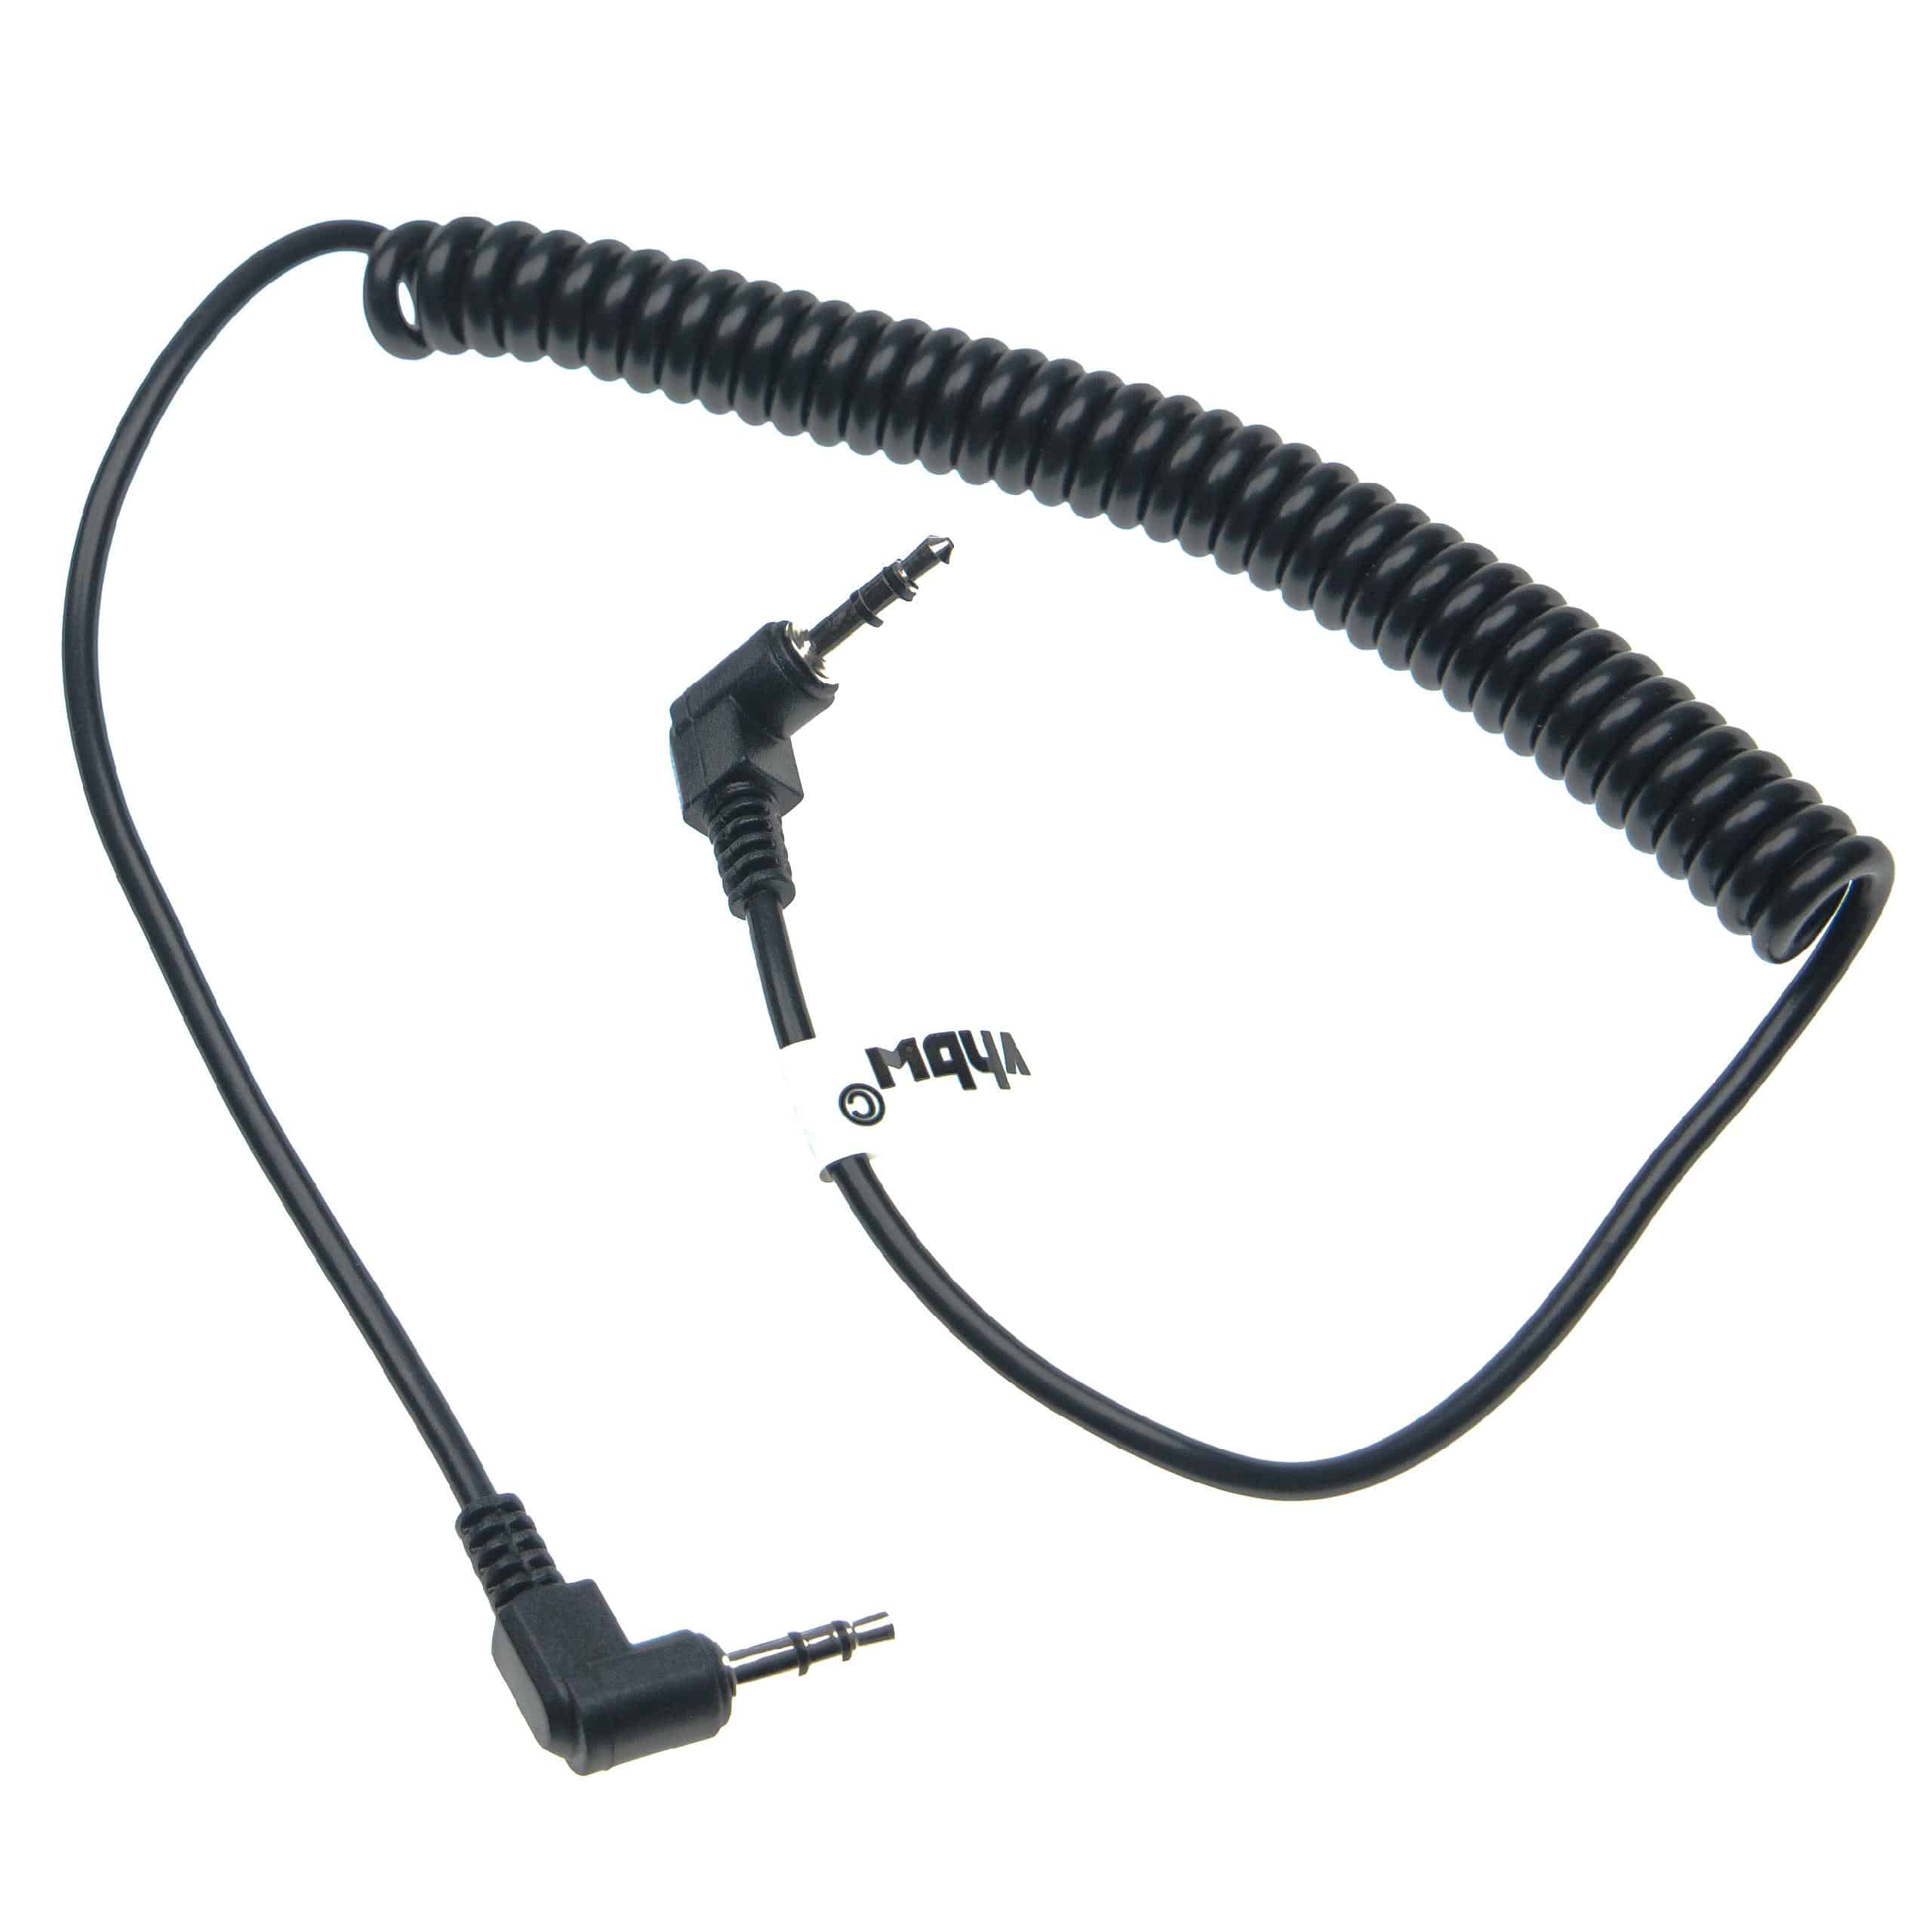 Cable for Shutter Release suitable for MZ6 Pentax, Samsung, Canon MZ6 Camera etc. - 140 cm